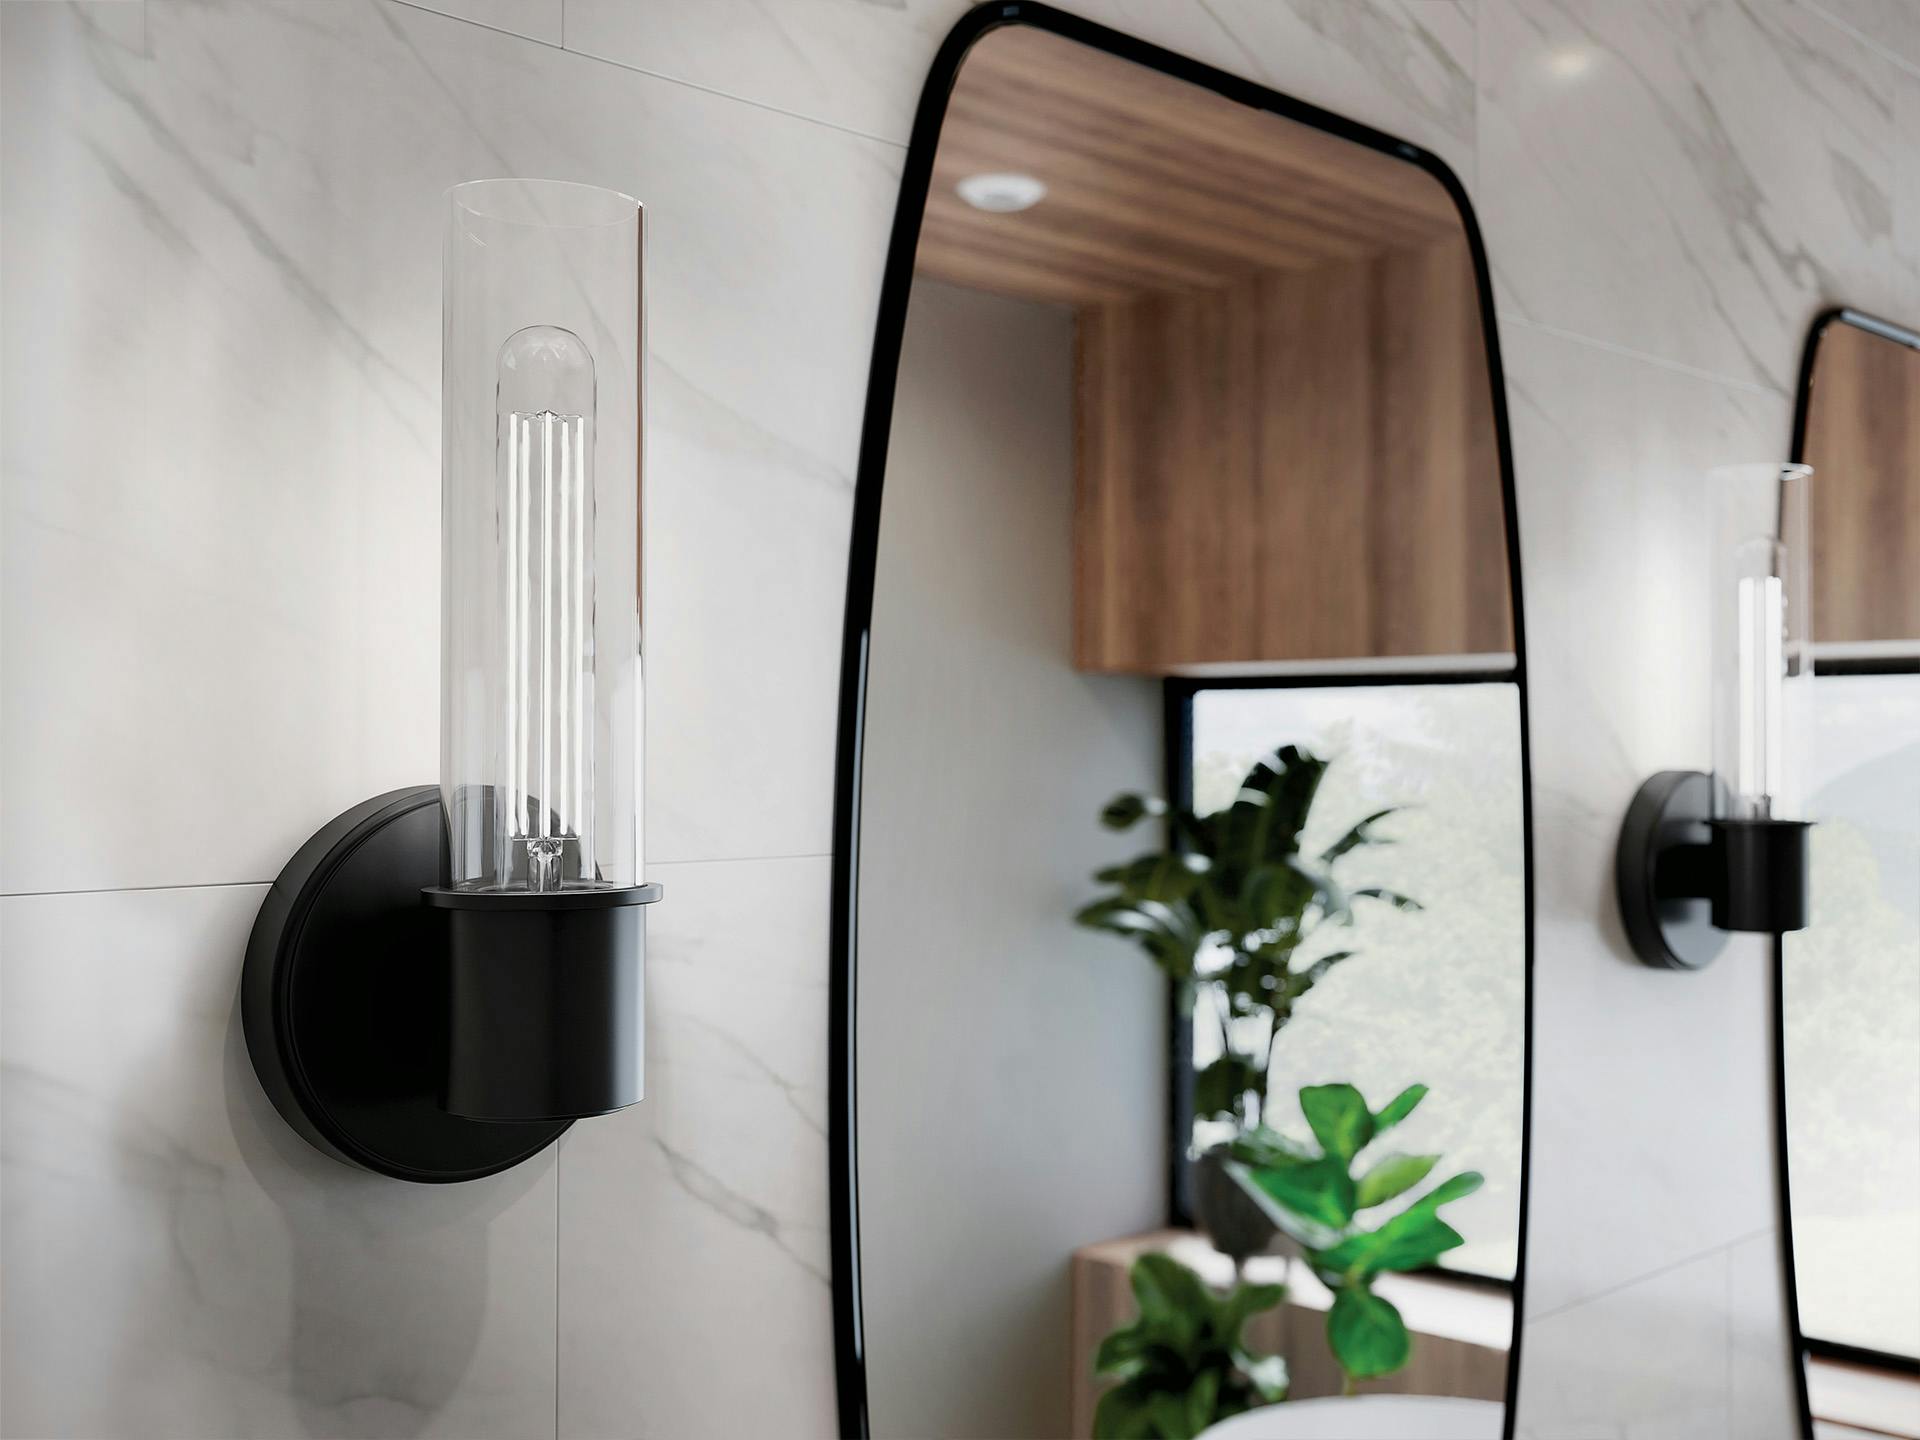 Aviv wall sconce in black finish on a white tiled wall next to a black framed mirror